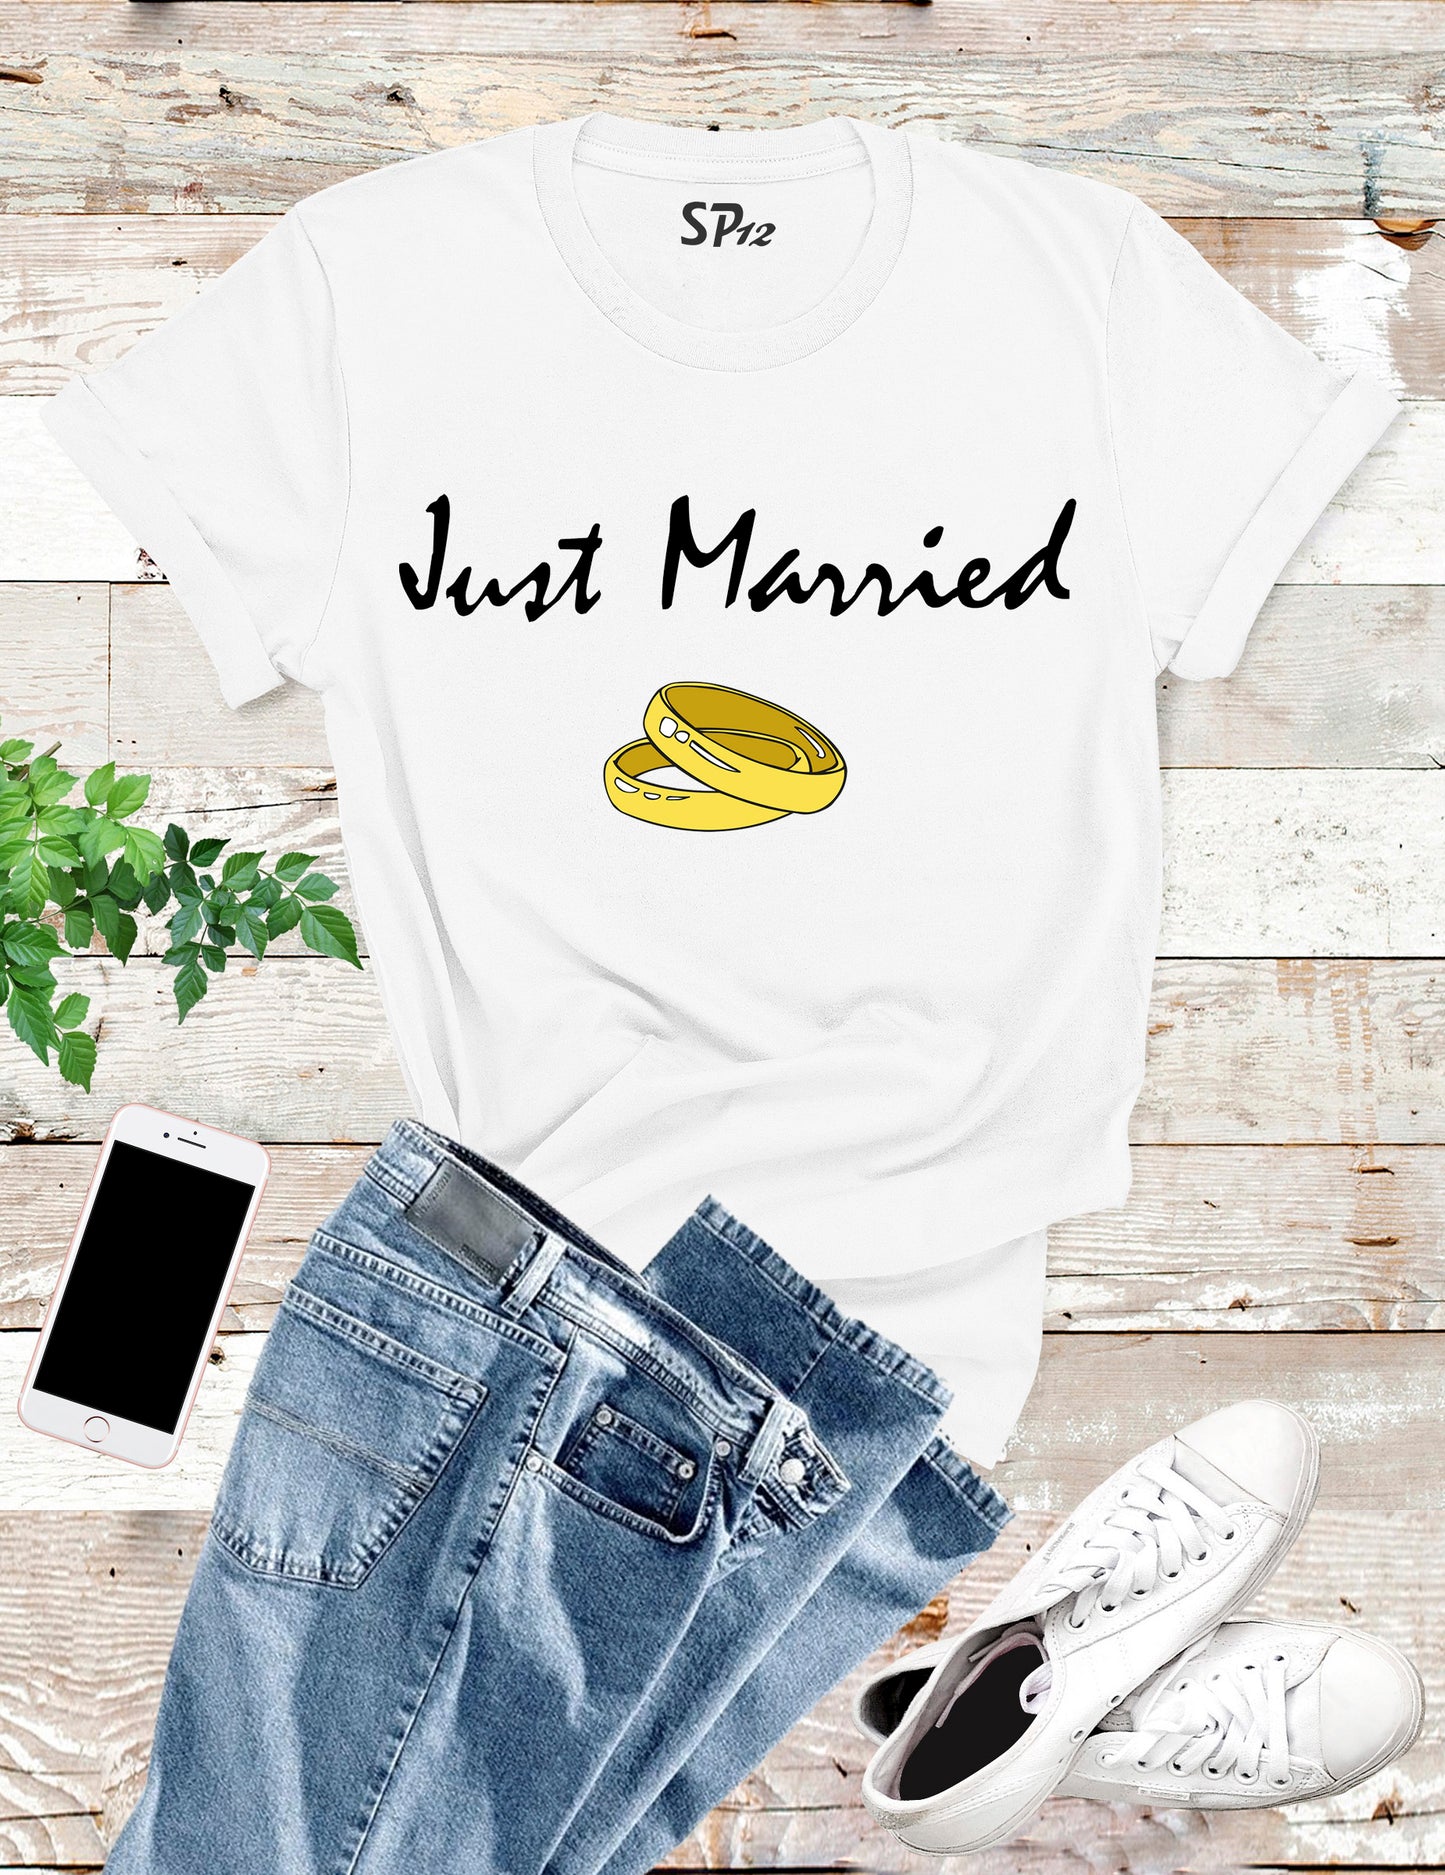 Wedding Rings T shirt Just Married Two became one